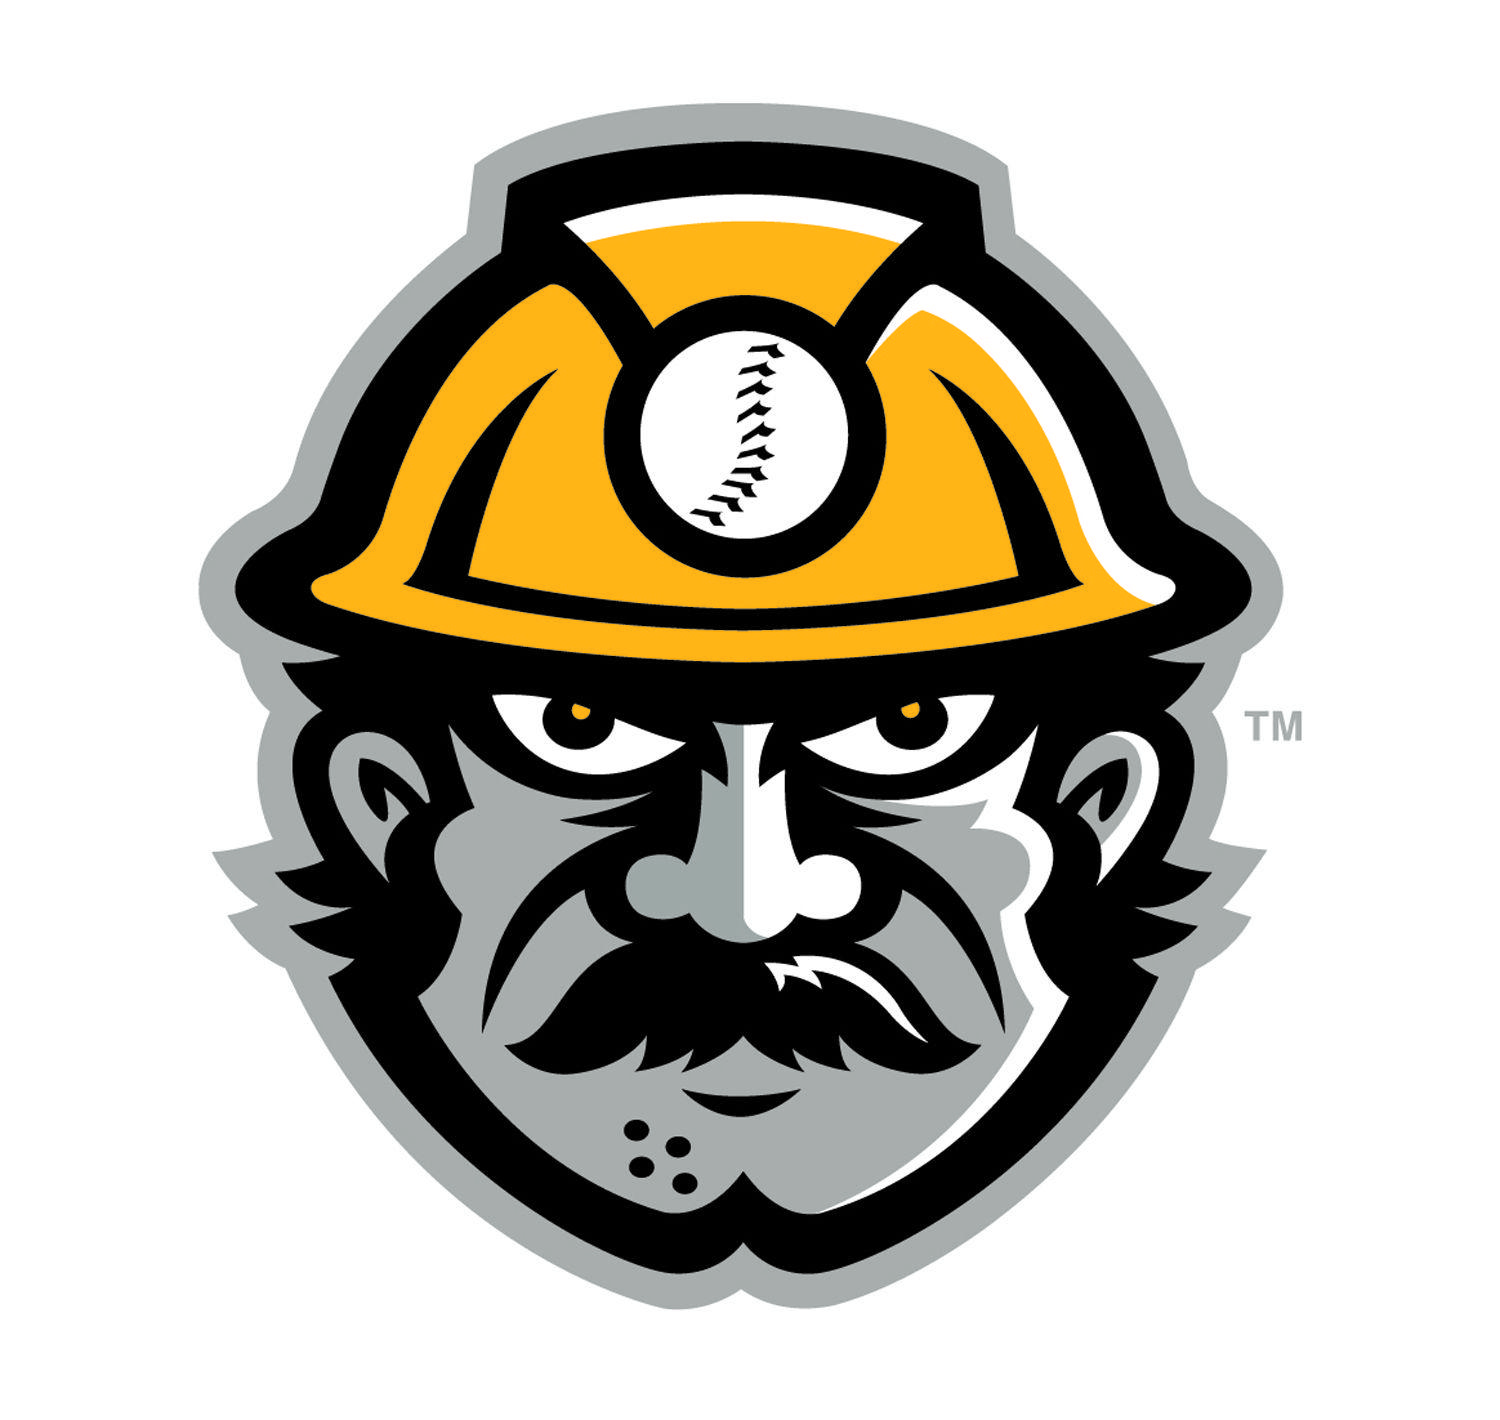 Miners Logo - Our New Madisonville Miner Logos Are Here! | Madisonville Miners ...